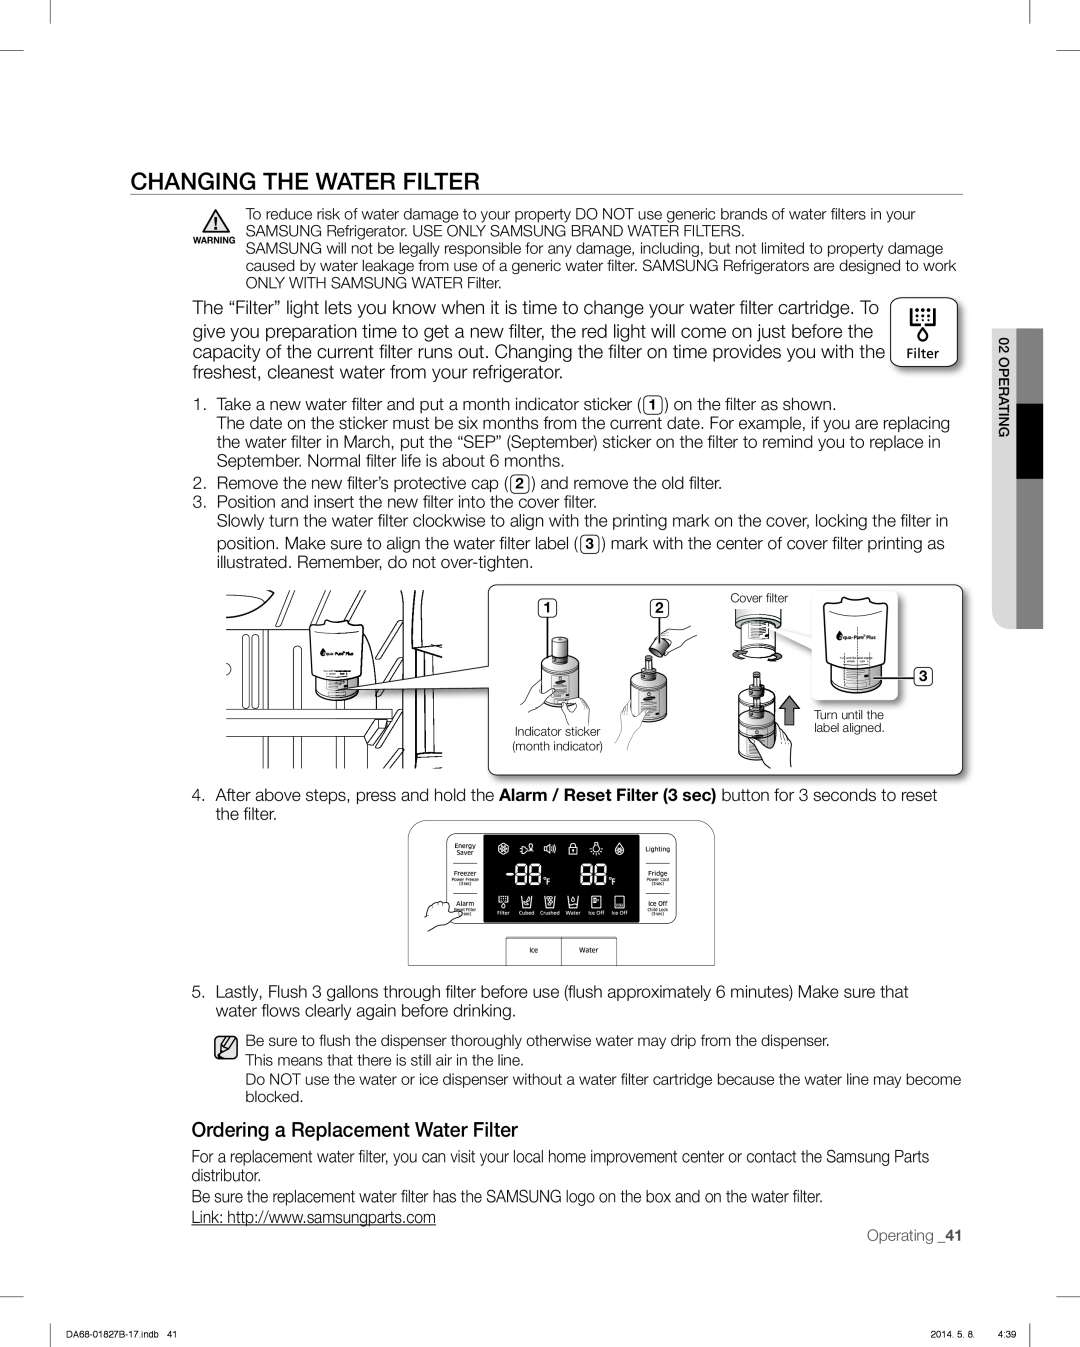 Samsung RFG237AABP, RFG237AARS, RFG237AAWP user manual Changing The Water Filter, Ordering a Replacement Water Filter 